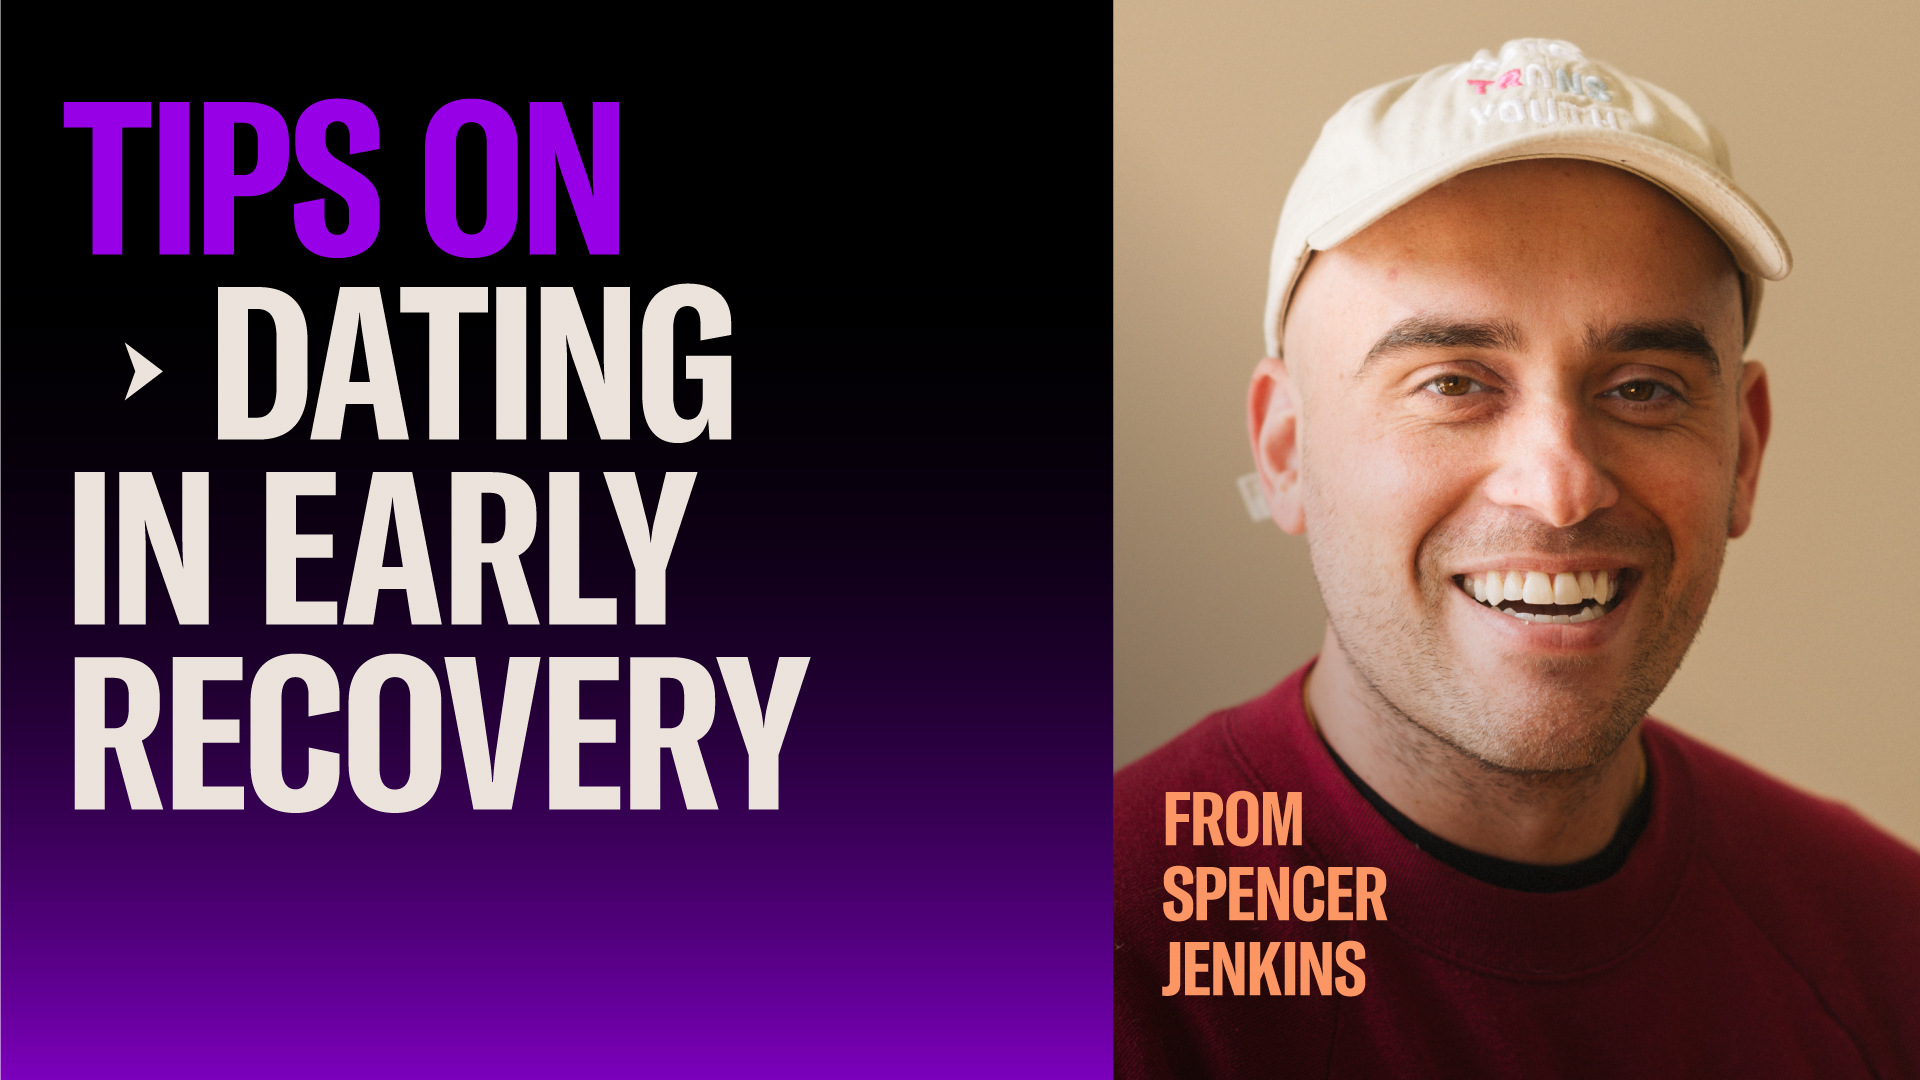 5 TIPS FOR DATING IN EARLY RECOVERY  Spencer Jenkins is the founder and Editor-in-Chief of Queer Kentucky, a   southern LGBTQ+ publication based in Louisville, Kentucky. His writing has also appeared in Queerency, SENSITIVE CONTENT, and KentuckyTourism.com.